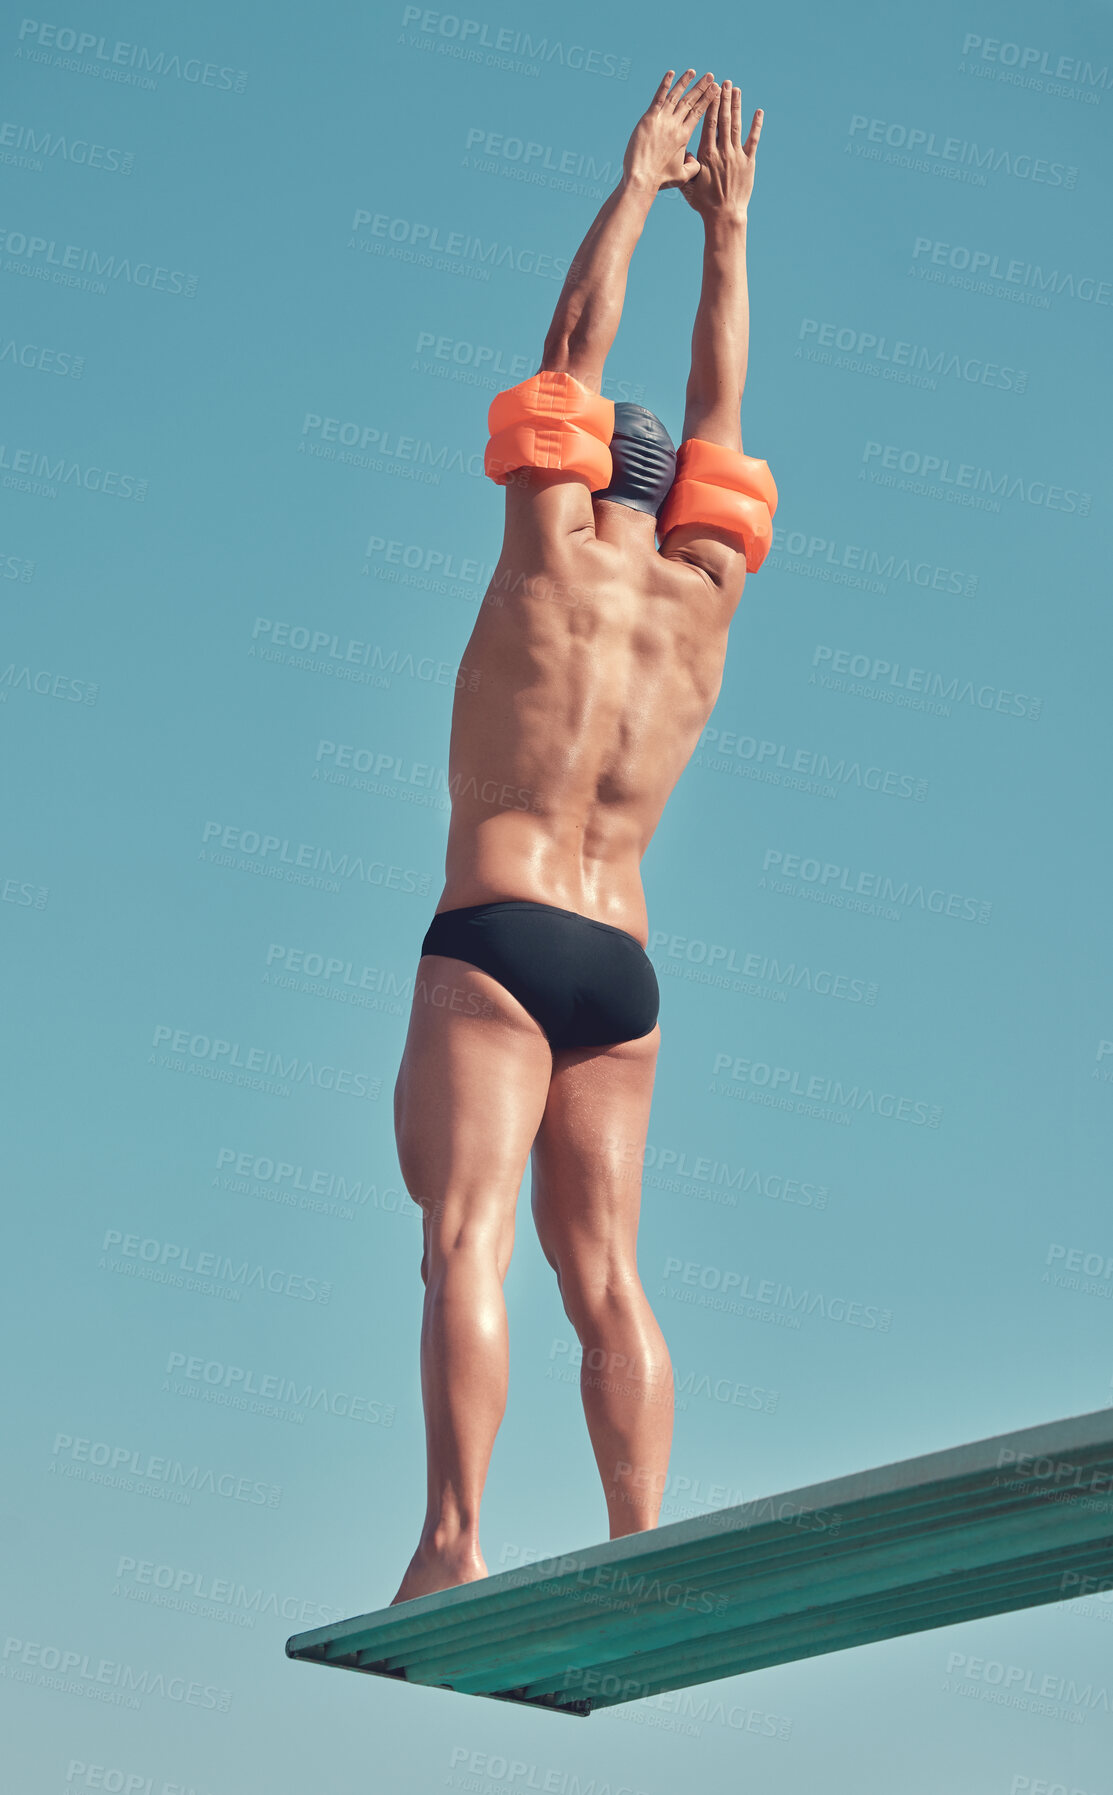 Buy stock photo Rearview shot of an unrecognizable male athlete standing on a diving board outside